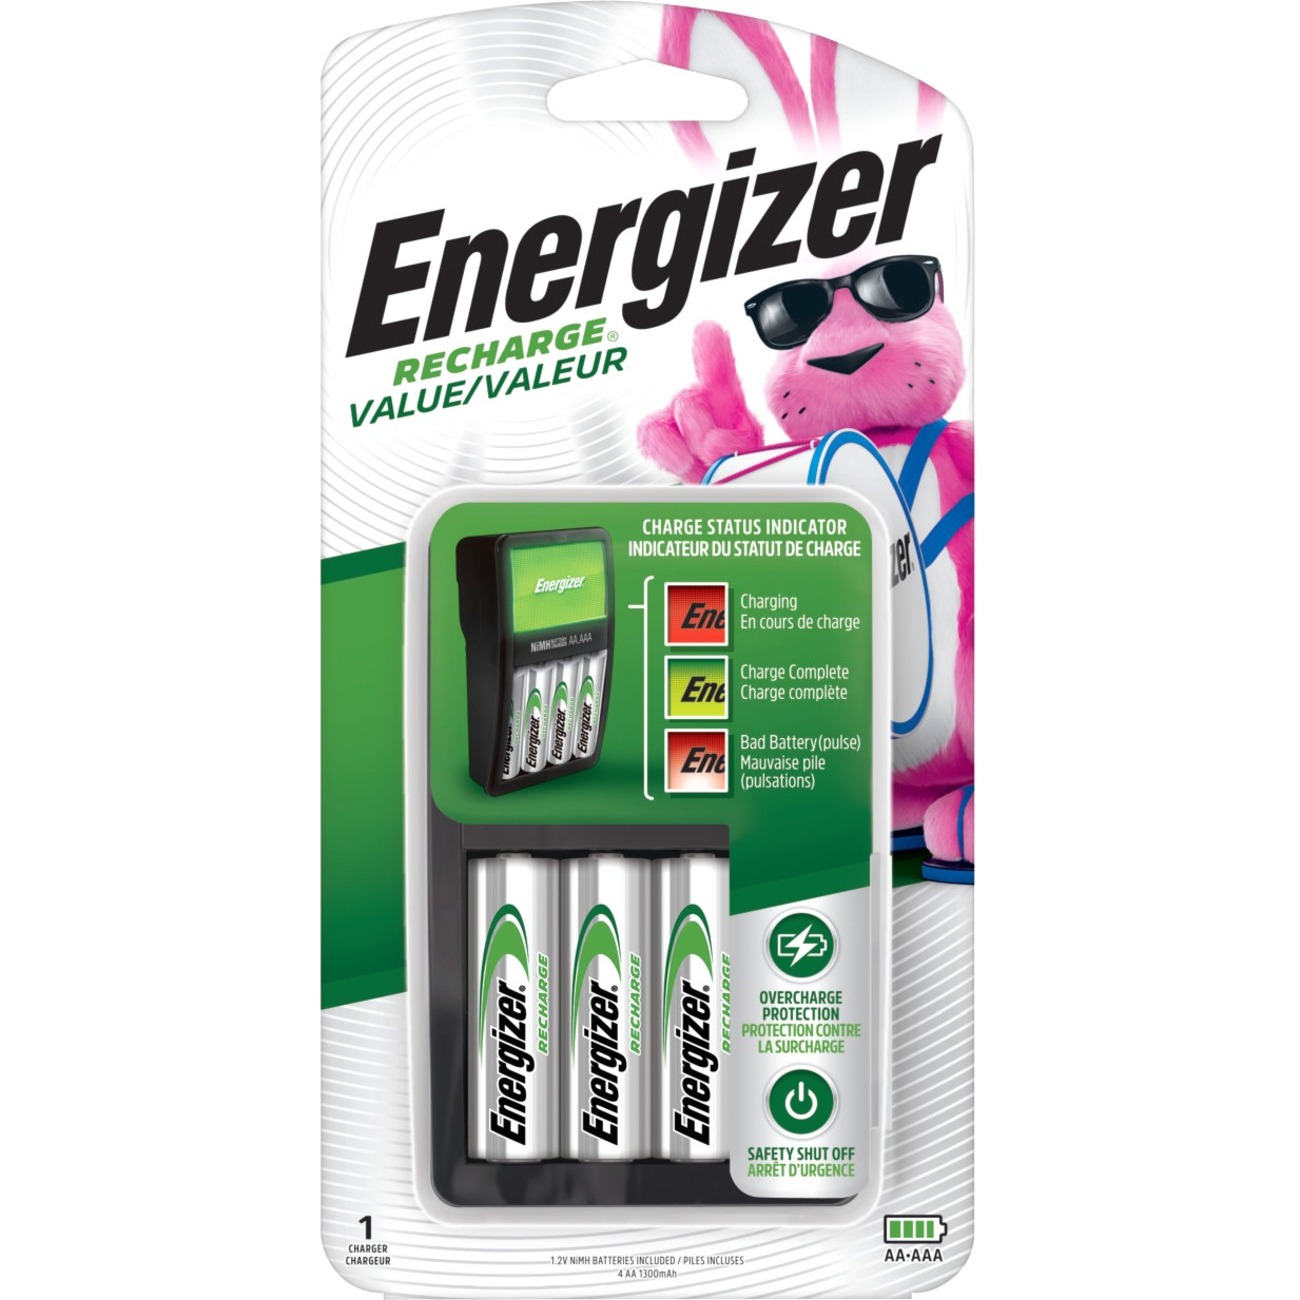 Decoratief Beoefend Dicht Glennco Office Products Ltd. :: Technology :: Power & Backup :: Power  Equipment & Supplies :: Battery Chargers :: Energizer CHVCMWB-4 AC Charger  - 1 Each